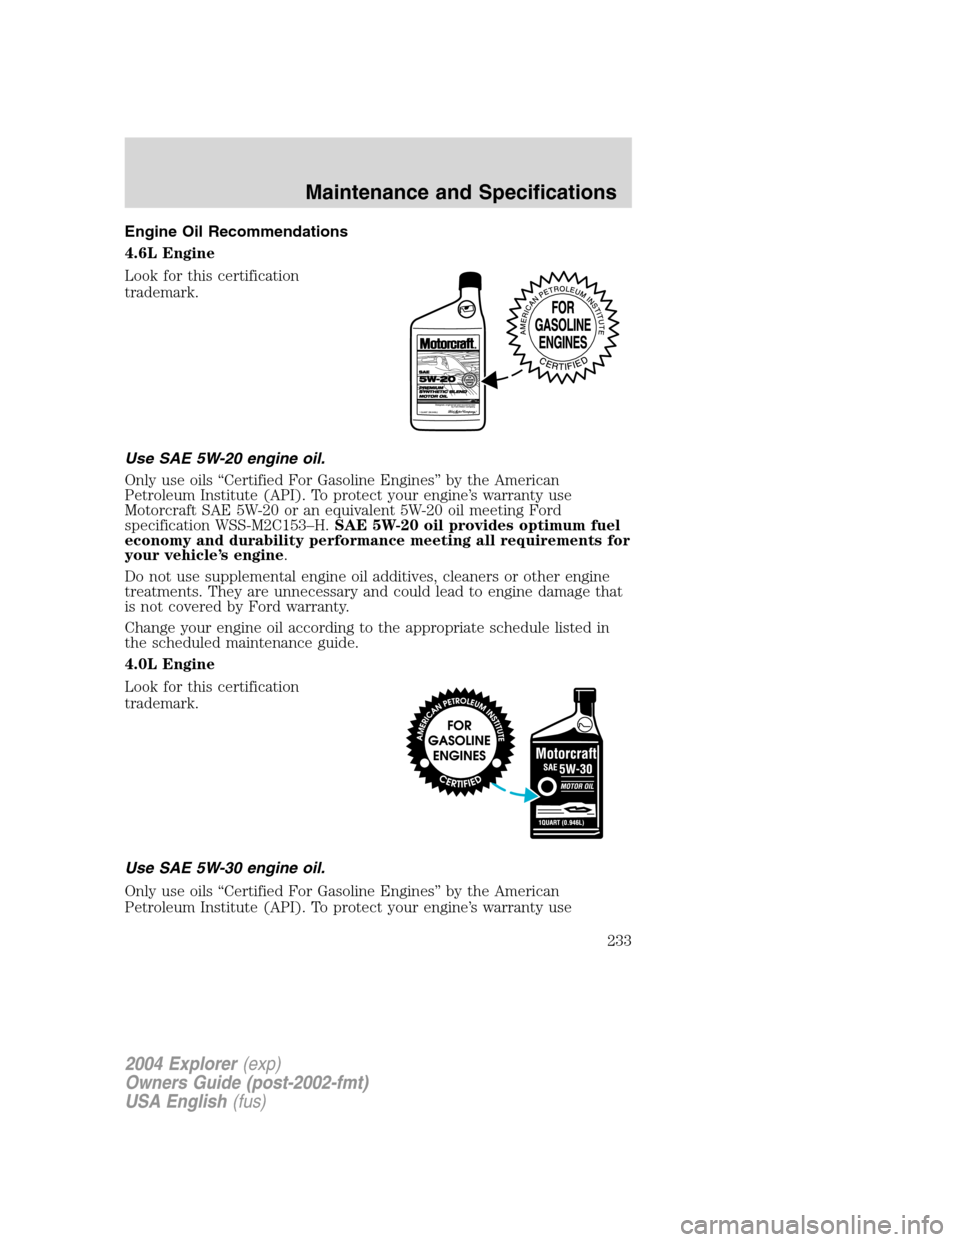 FORD EXPLORER 2004 3.G Owners Manual Engine Oil Recommendations
4.6L Engine
Look for this certification
trademark.
Use SAE 5W-20 engine oil.
Only use oils “Certified For Gasoline Engines” by the American
Petroleum Institute (API). To